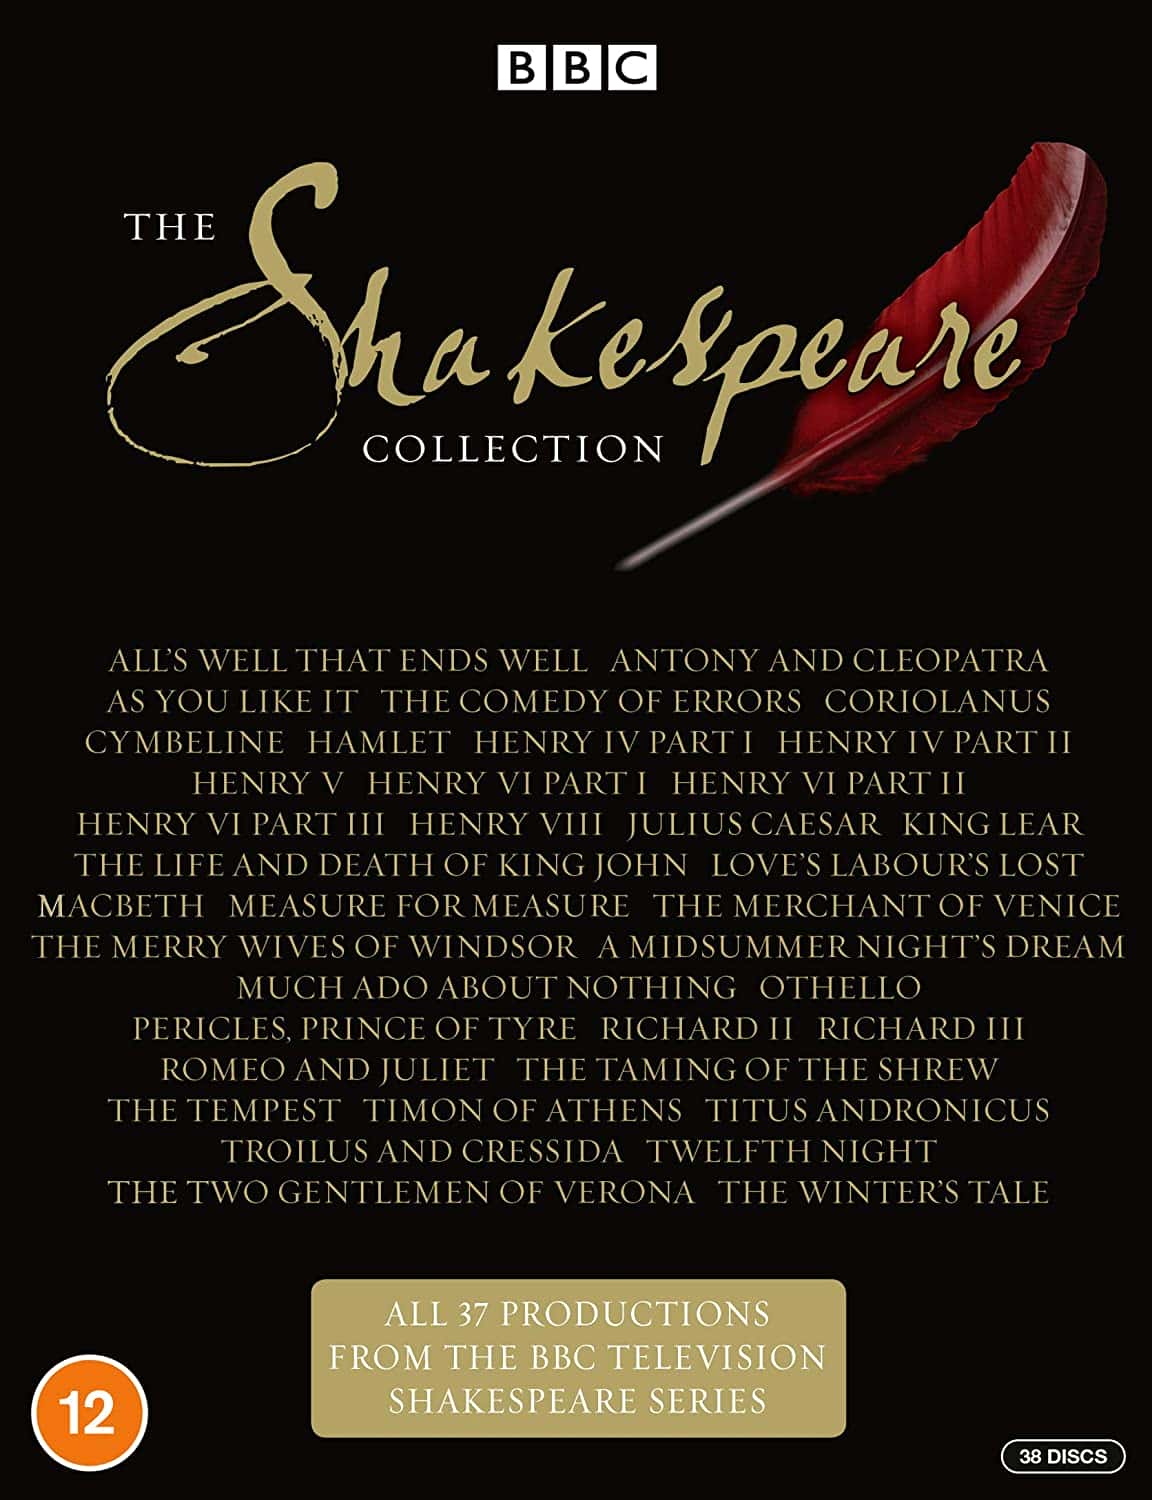 ¼ƬBBCɯʿǾѡ / The BBC Television Shakespeare Collection-Ѹ